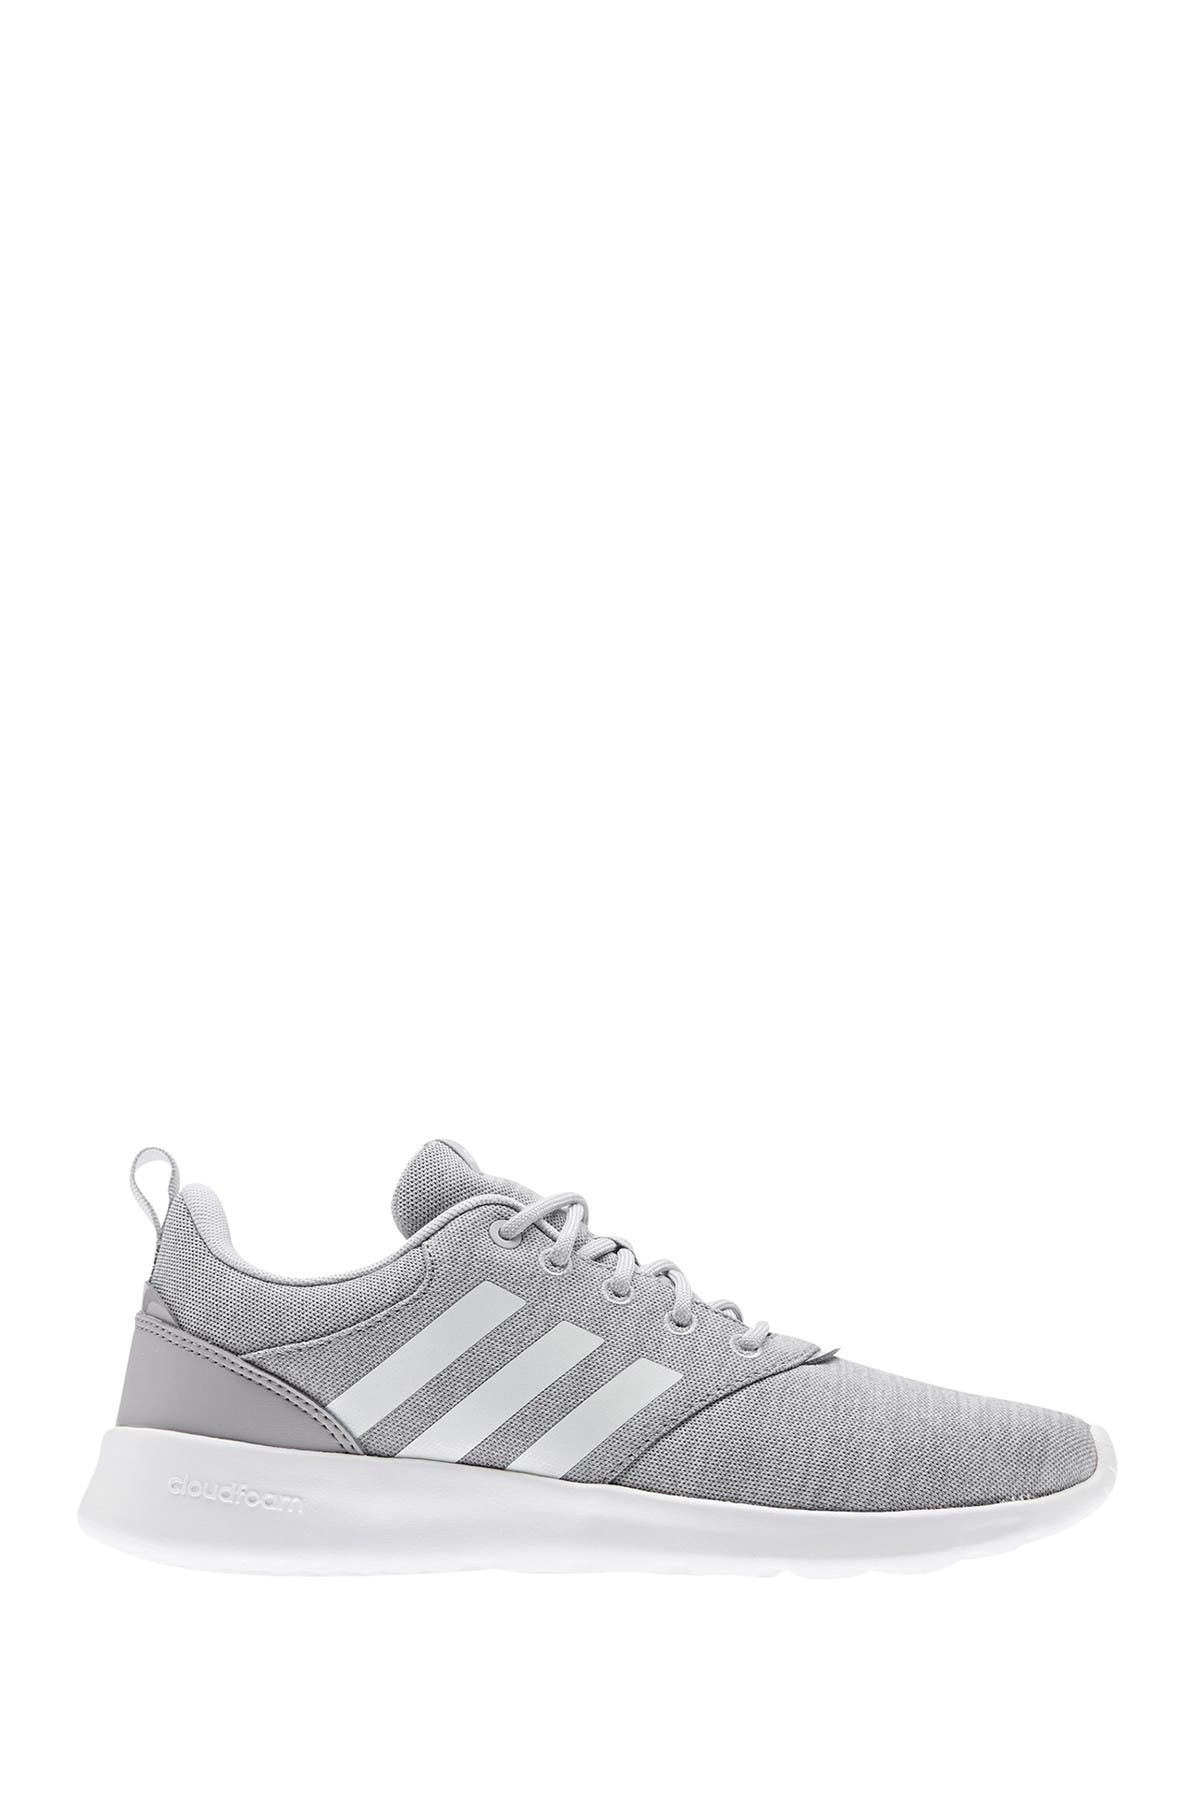 are adidas qt racer good for running